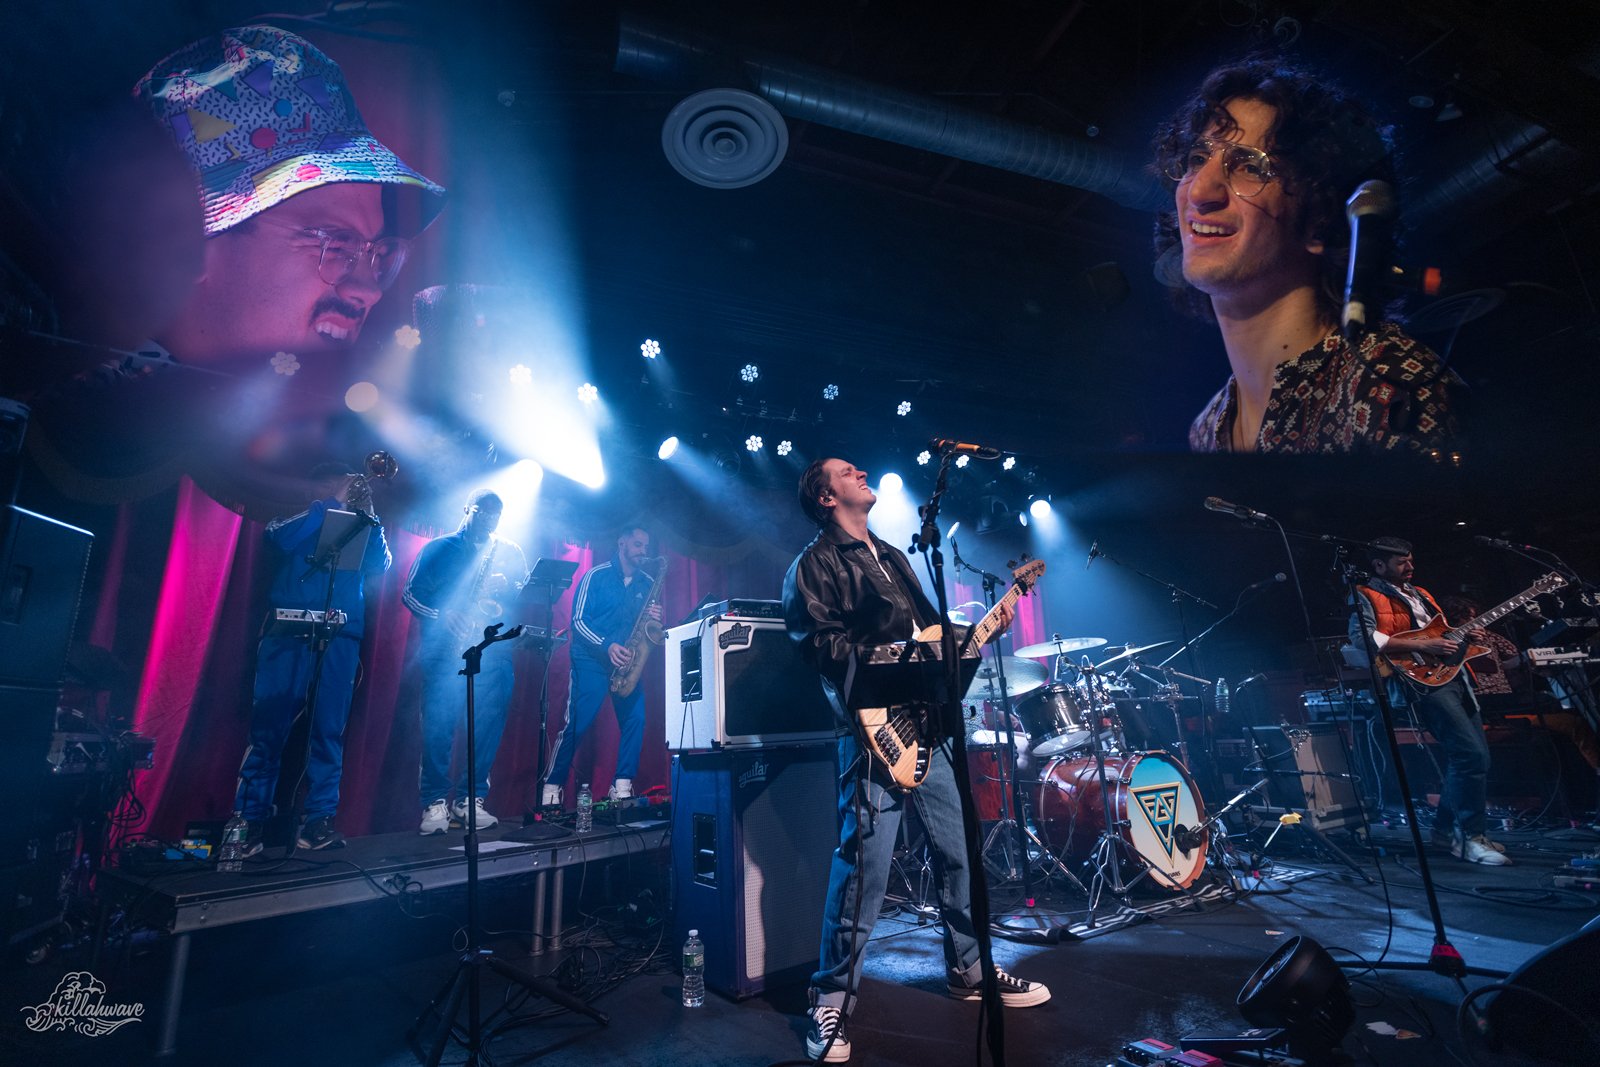 Eggy Presents Purim: Reelin' In The Years at the Brooklyn Bowl